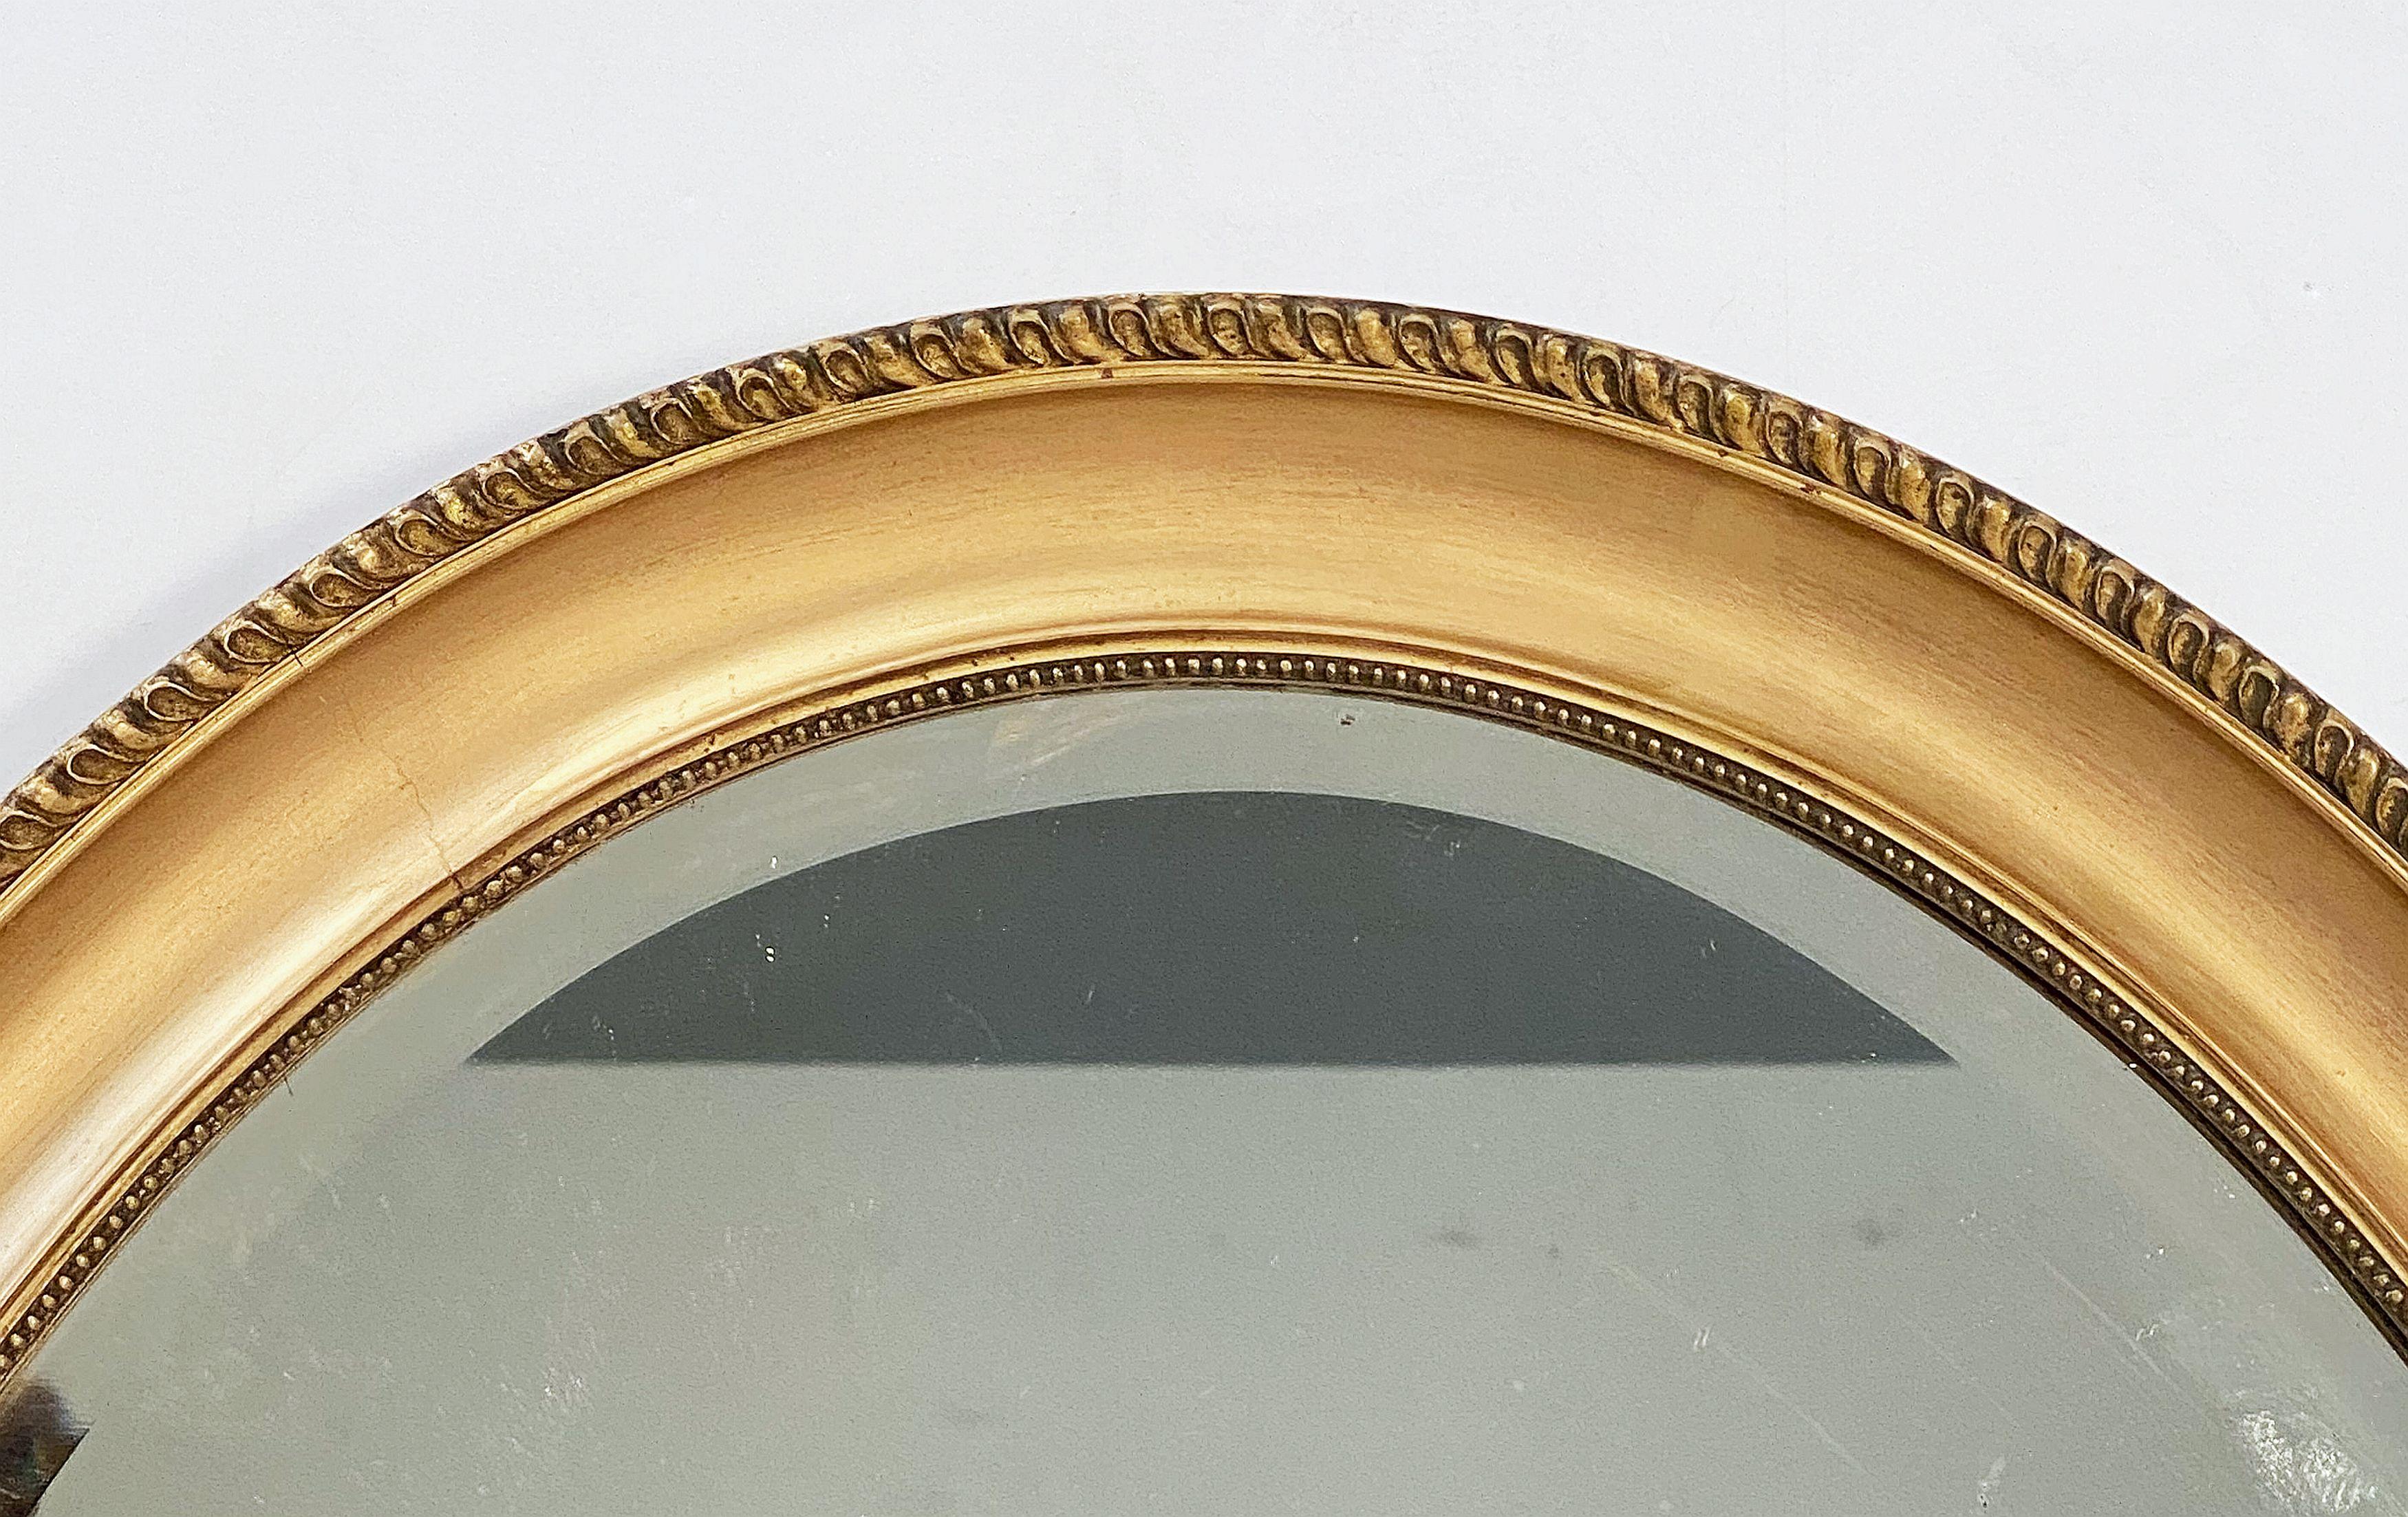 20th Century English Oval Beveled Mirror in Gilt Frame (H 33 1/2 x W 23 3/4)